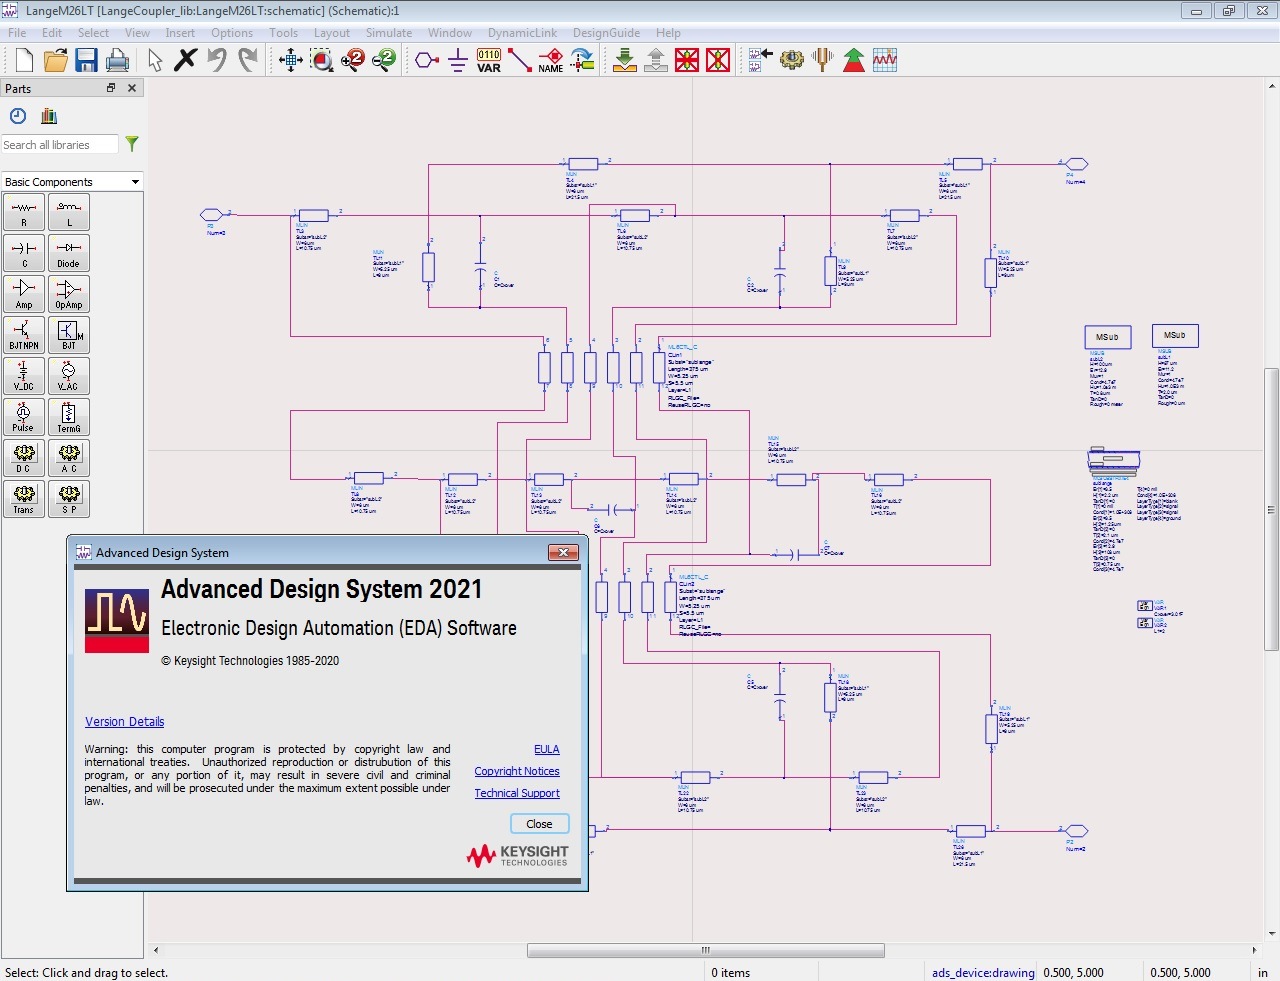 Working with Keysight ADS 2021.0 full license